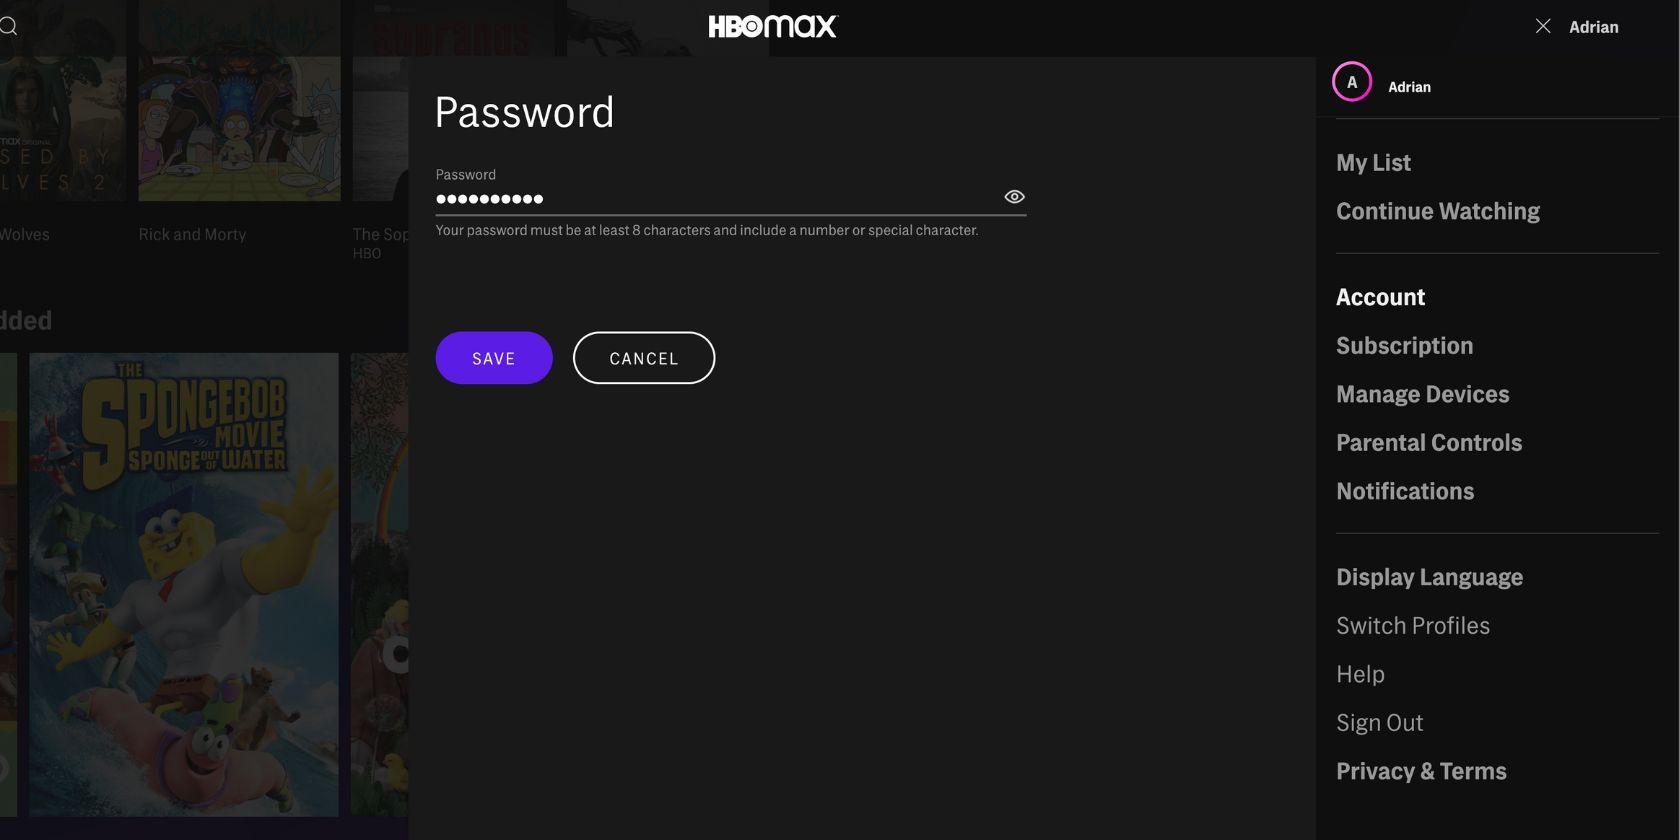 HBO Max change password page on Desktop